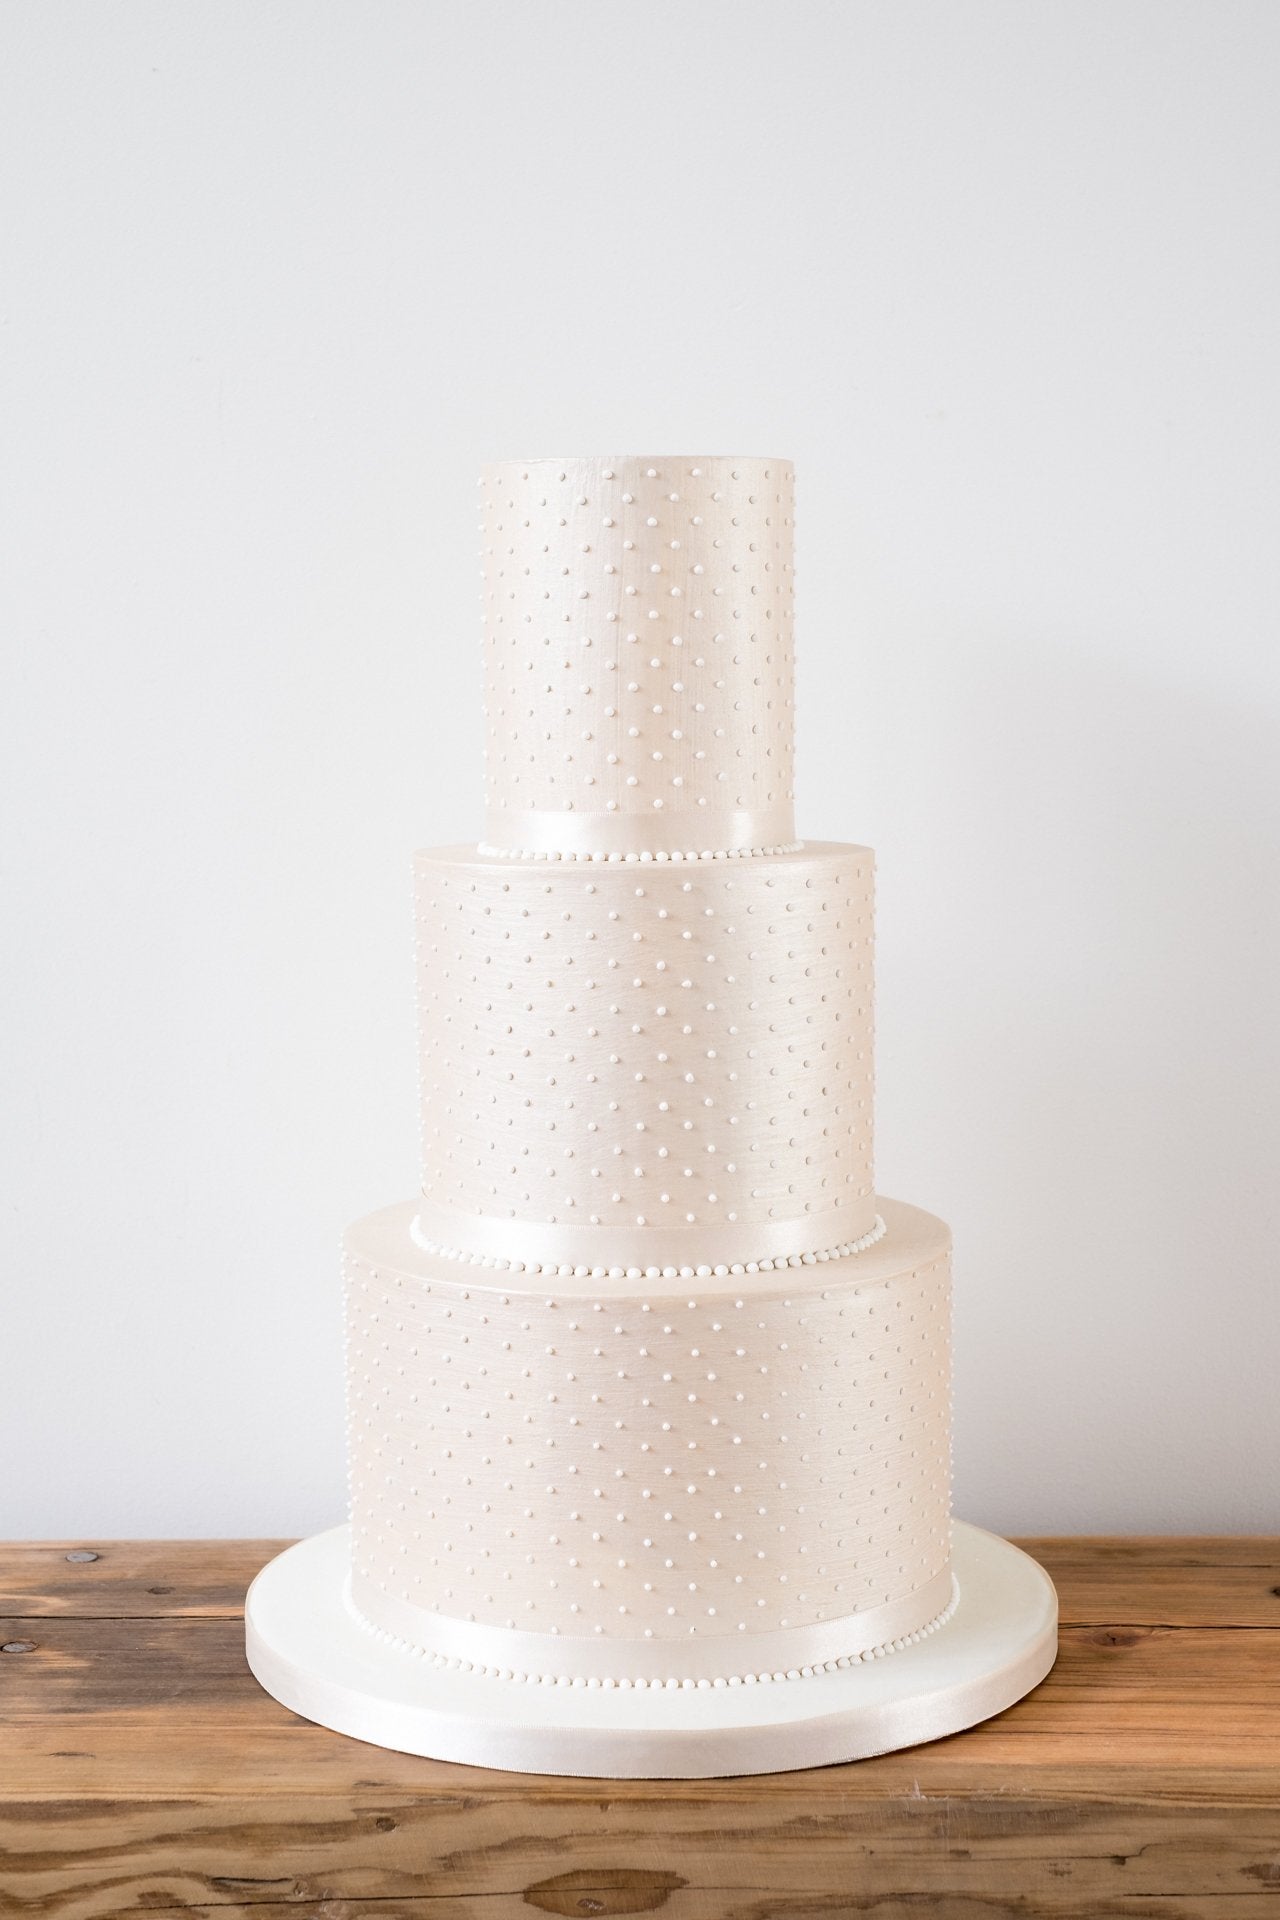 Simple and understated deep tiered modern wedding cake with sharp edges in a luxurious champagne colour with piped pearls by Saddleworth based Union Cakes